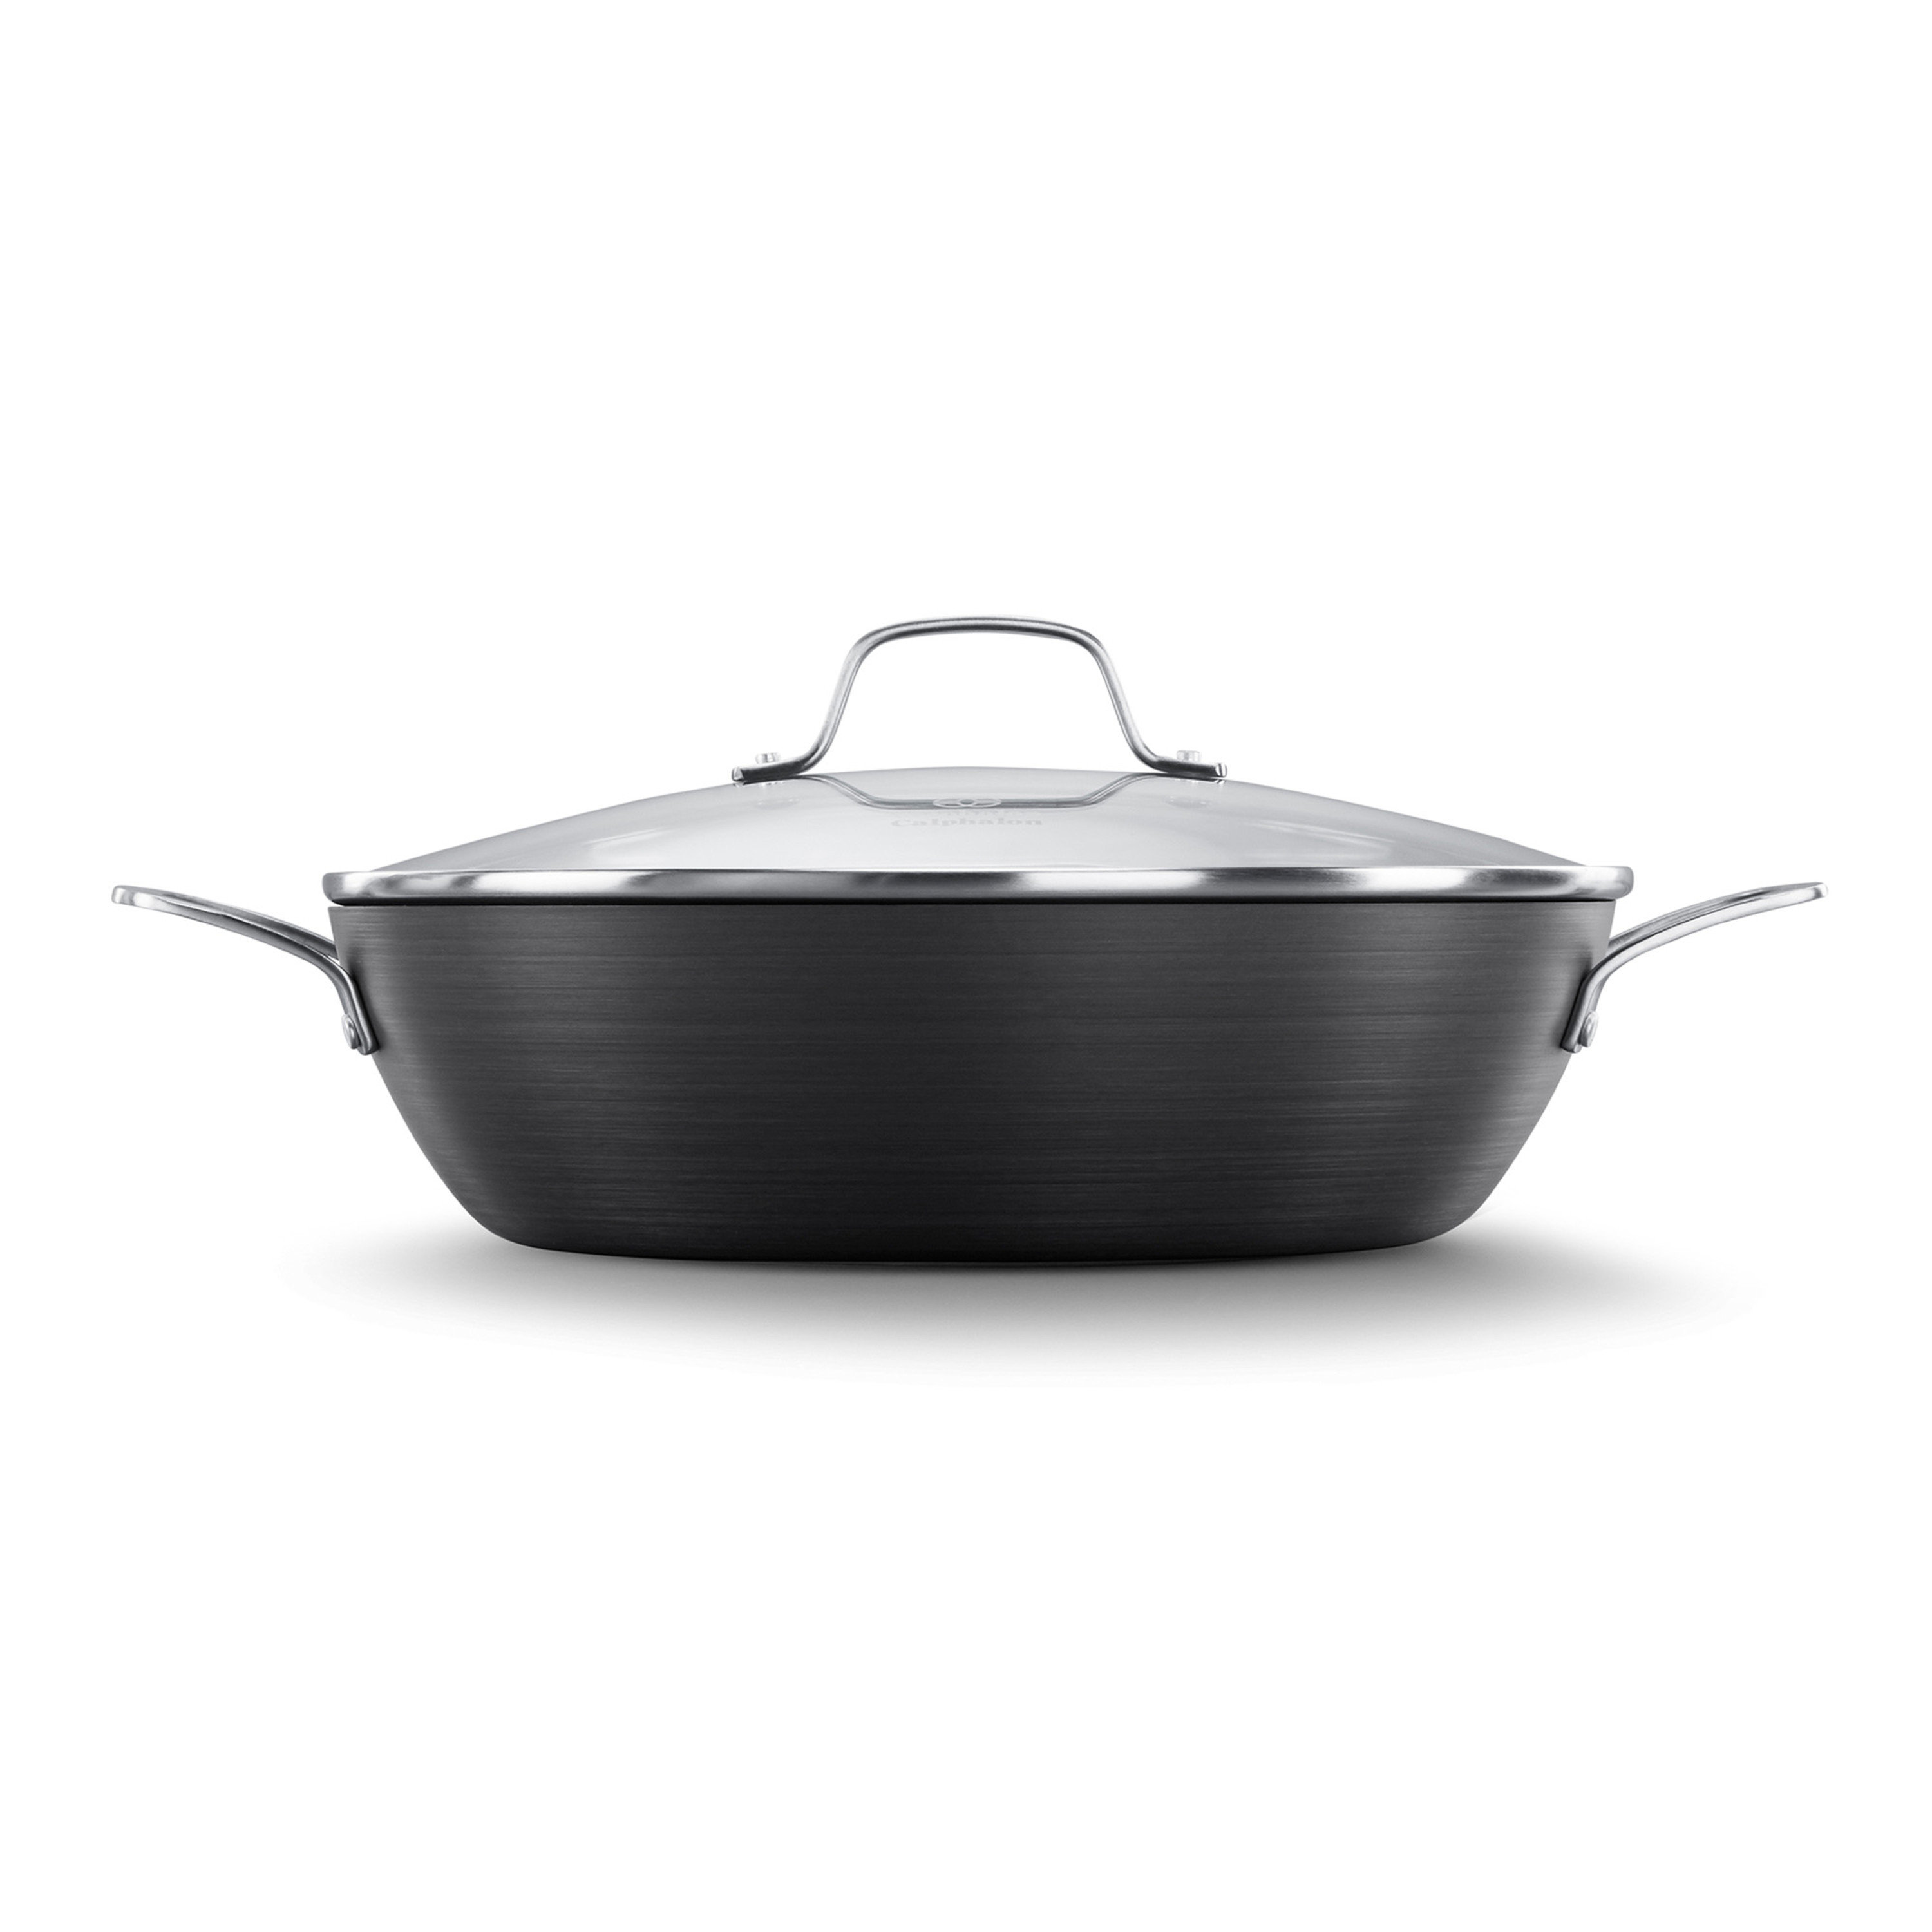 Calphalon Classic Hard-Anodized Nonstick 12-Inch Cooking Pan with Lid &  Reviews